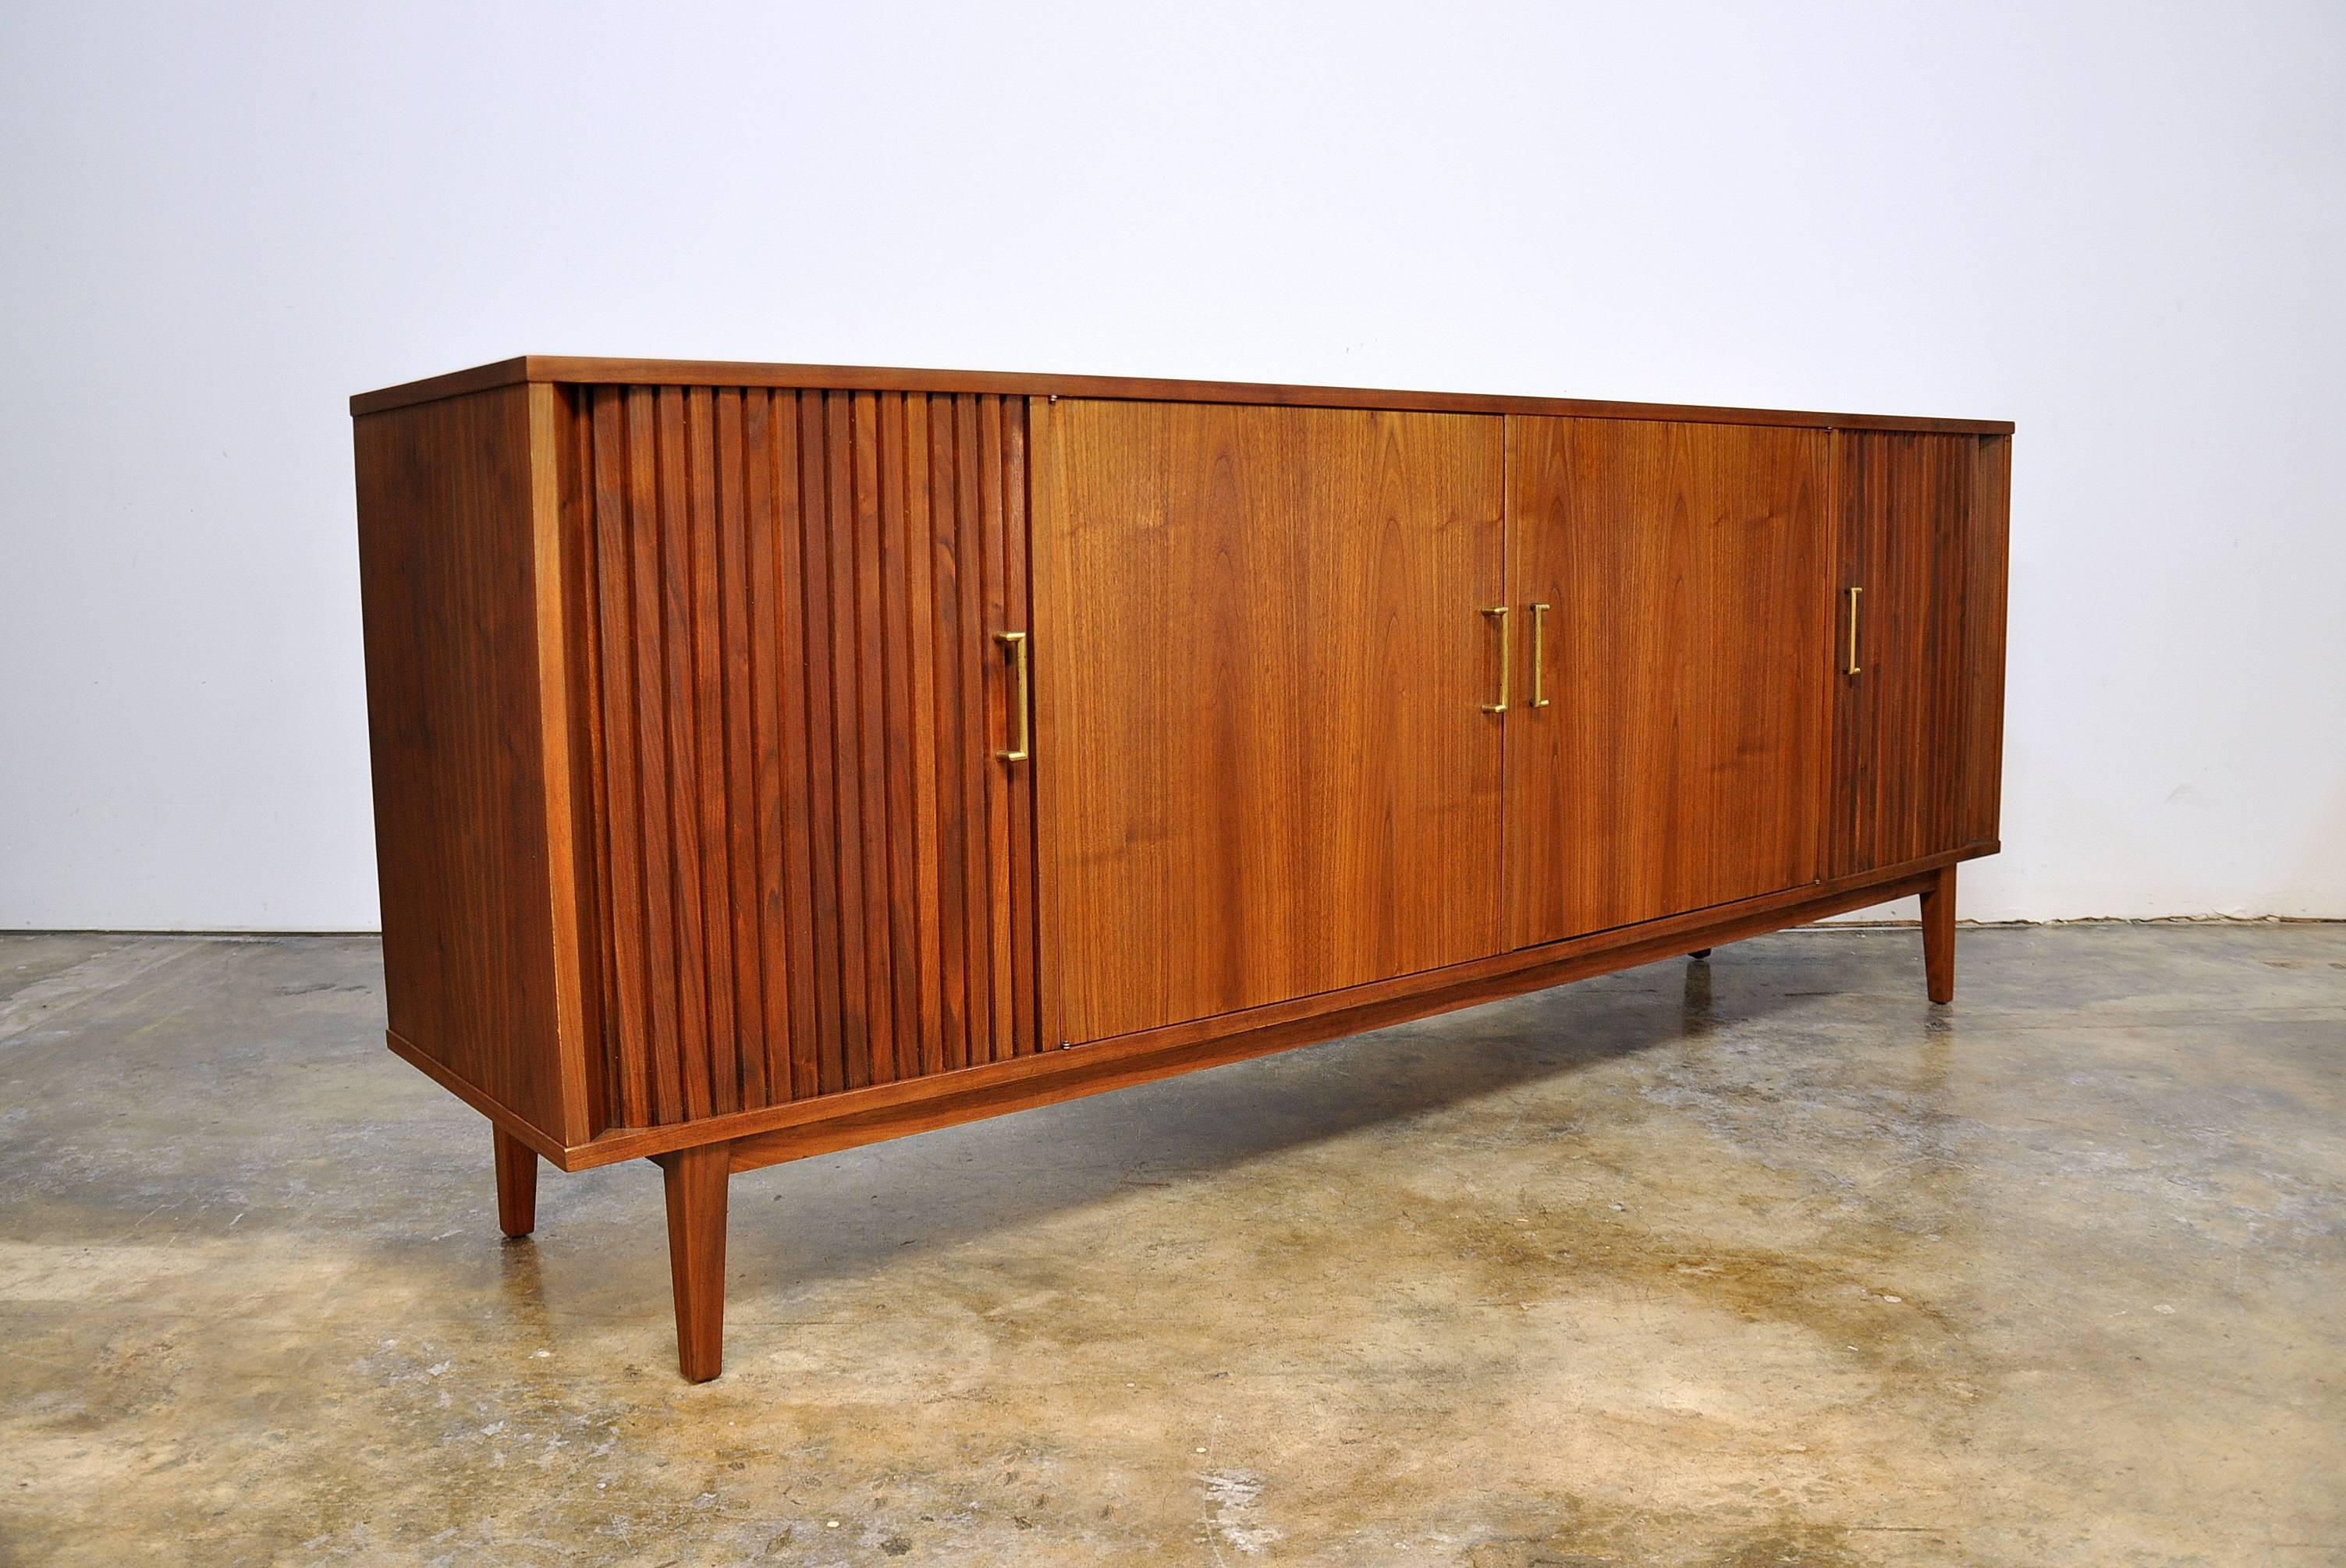 A superb Mid-Century Modern credenza from the Gallery Group that was manufactured in New York in the late 1950s. Having been professionally refinished, the figured walnut's striking grain patterns have come alive and are truly stunning. At nearly 7